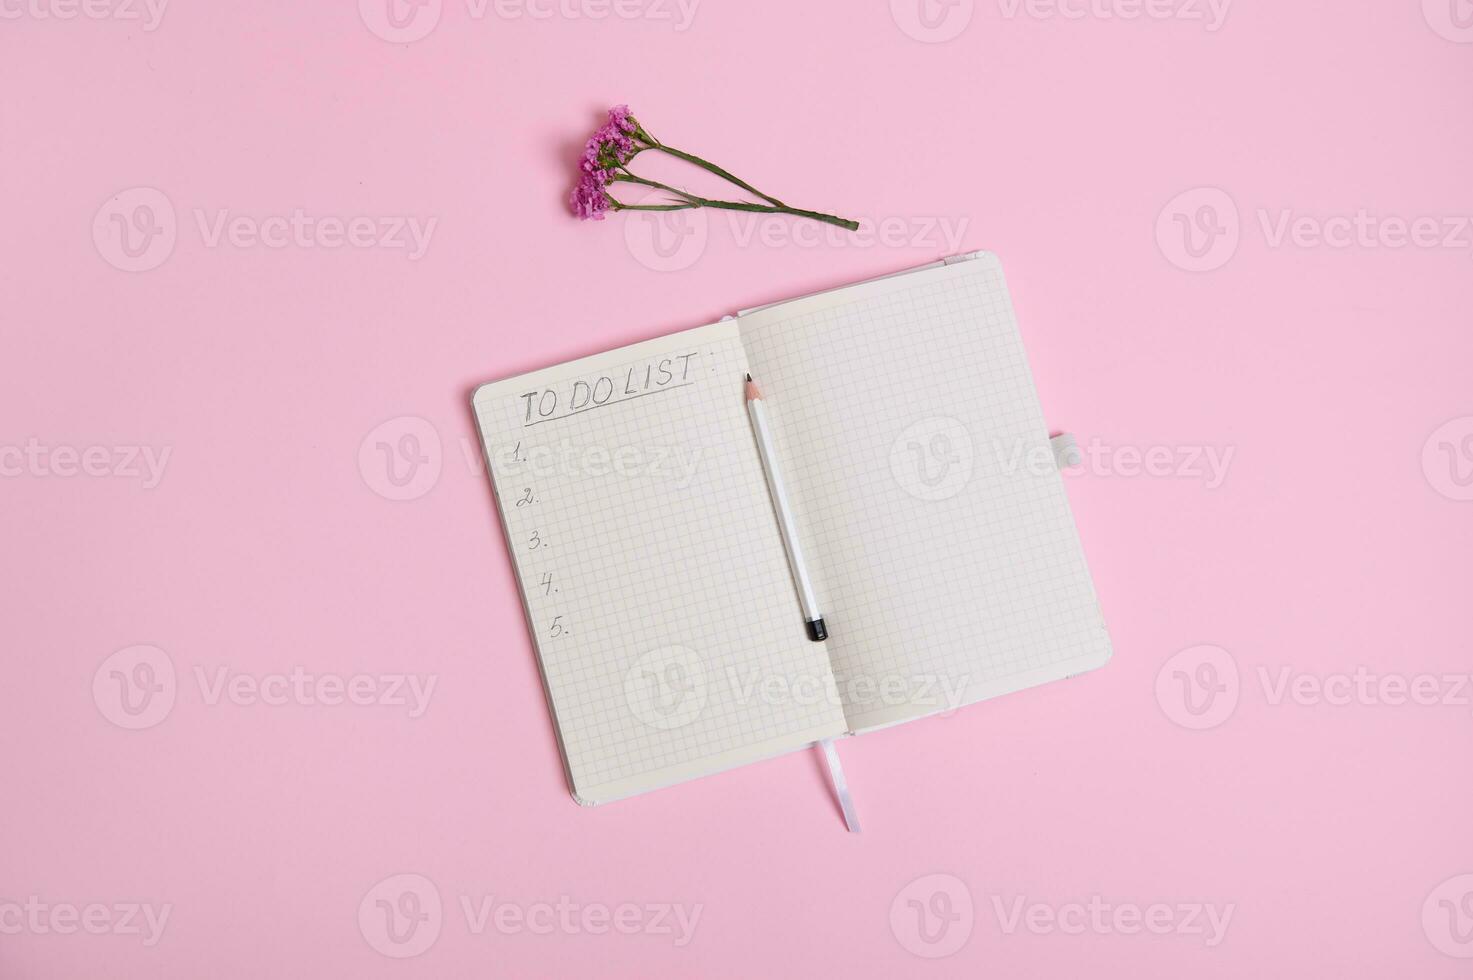 Still life. Open agenda, diary, notebook with a list to do on white sheet of paper in line with copy space, pencil in the middle of the agenda and meadow flower on pink background with copy space photo